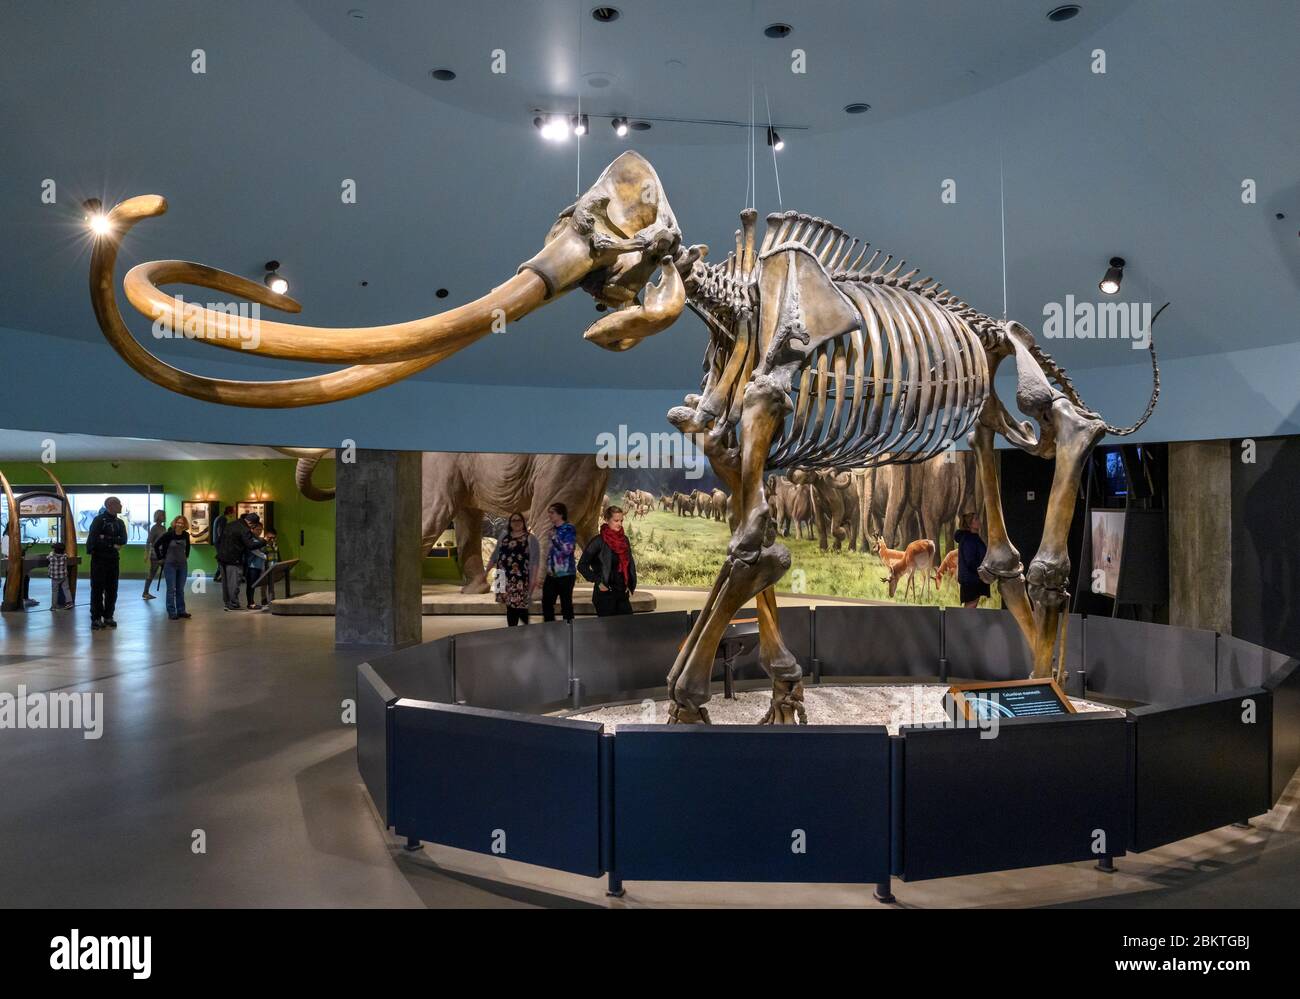 Visitors looking at the skeleton of a Columbian Mammoth (Mammuthus columbi) in the Museum at La Brea Tar Pits, Los Angeles, California, USA Stock Photo